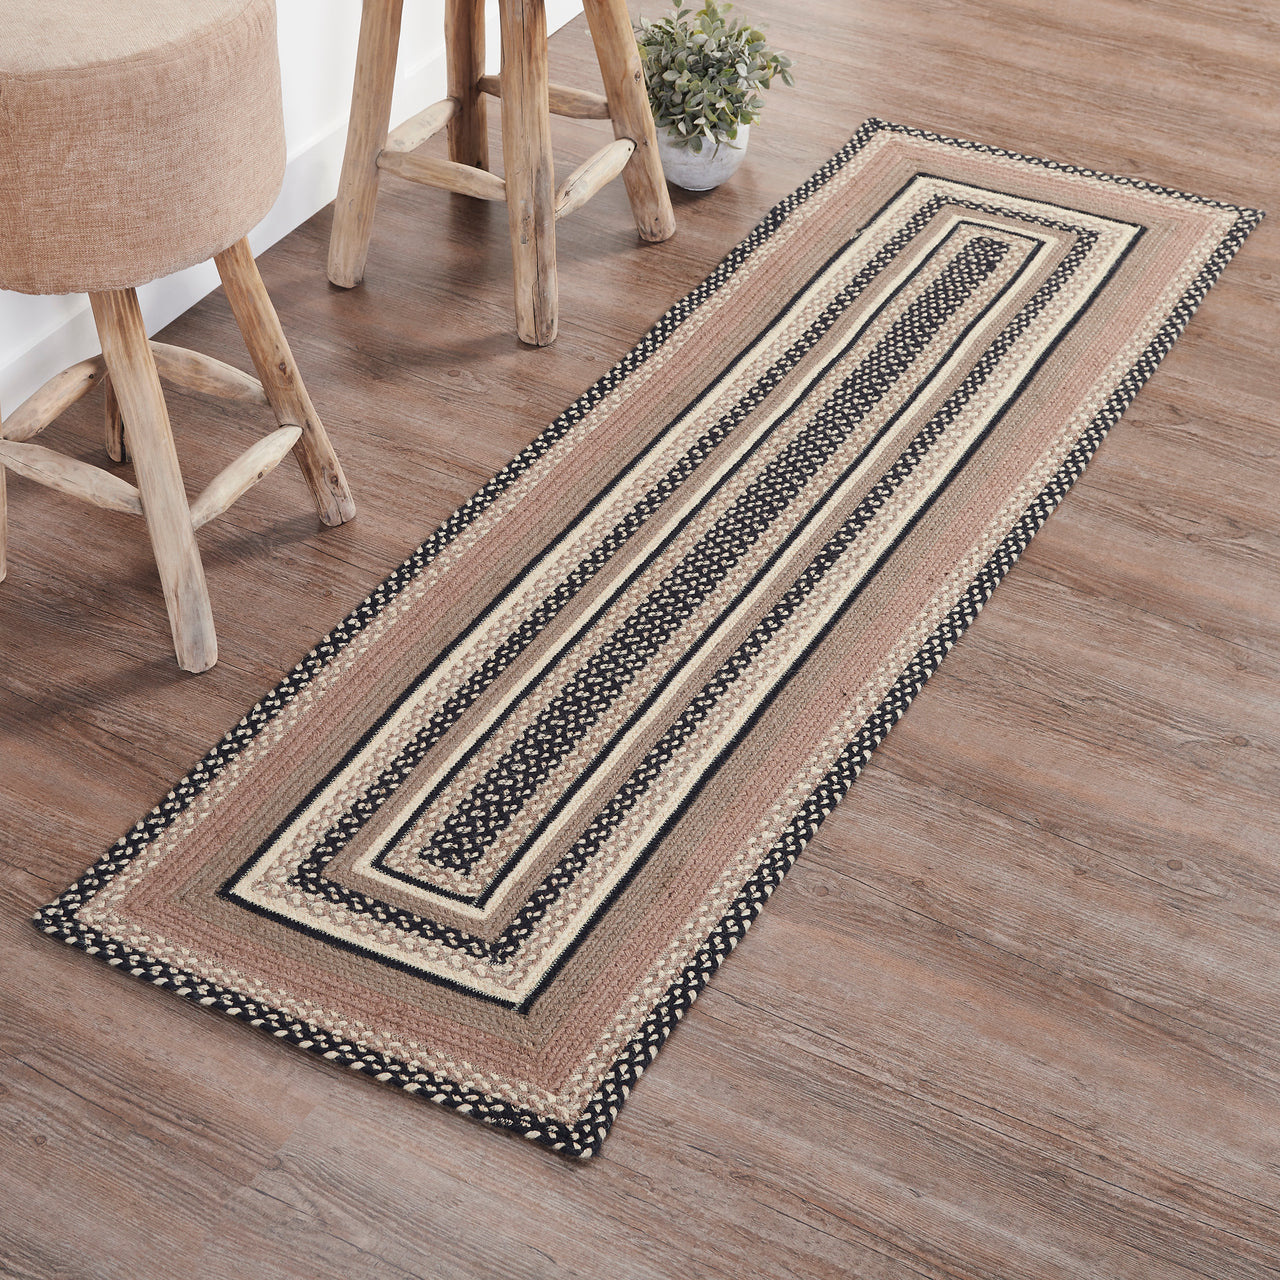 Sawyer Mill Charcoal Creme Jute Braided Rug/Runner Rect w/ Pad 2'x6.5' VHC Brands